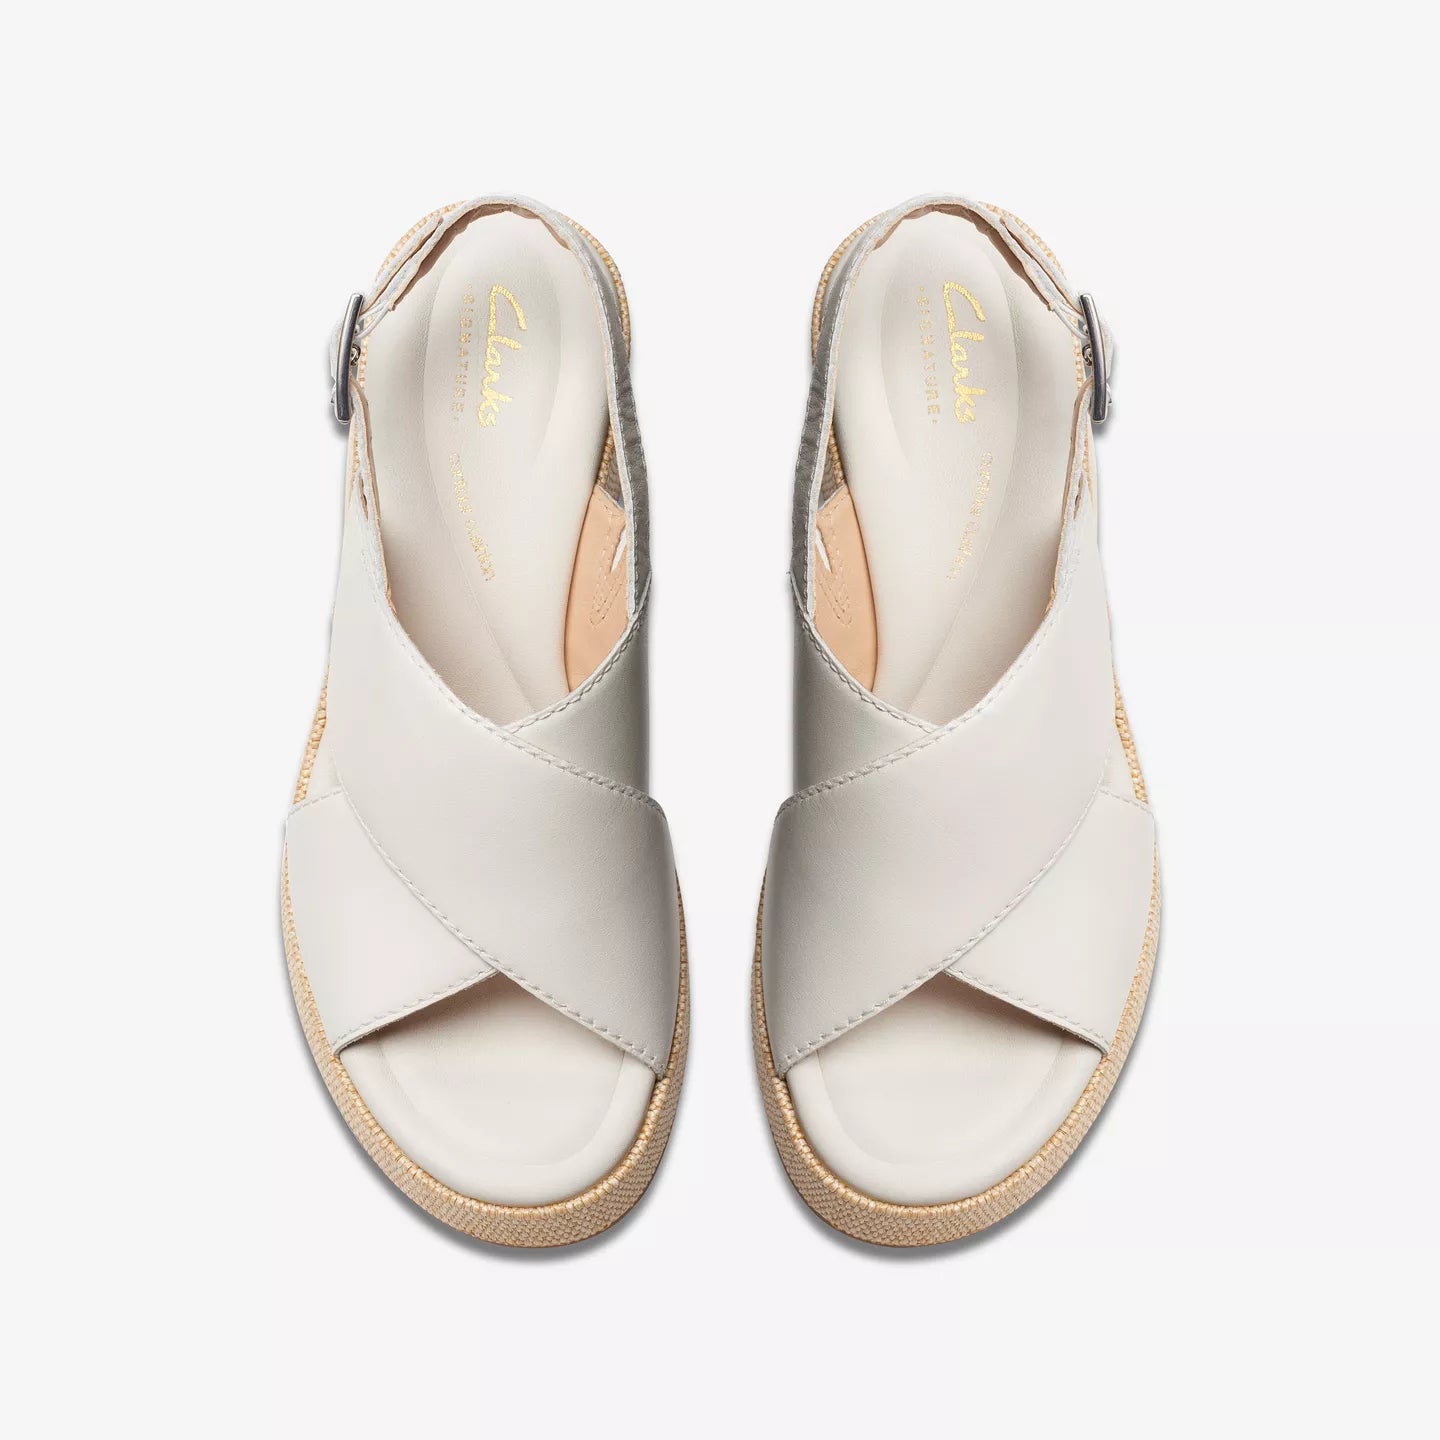 Clarks Manon Wish Off White Leather Wedge